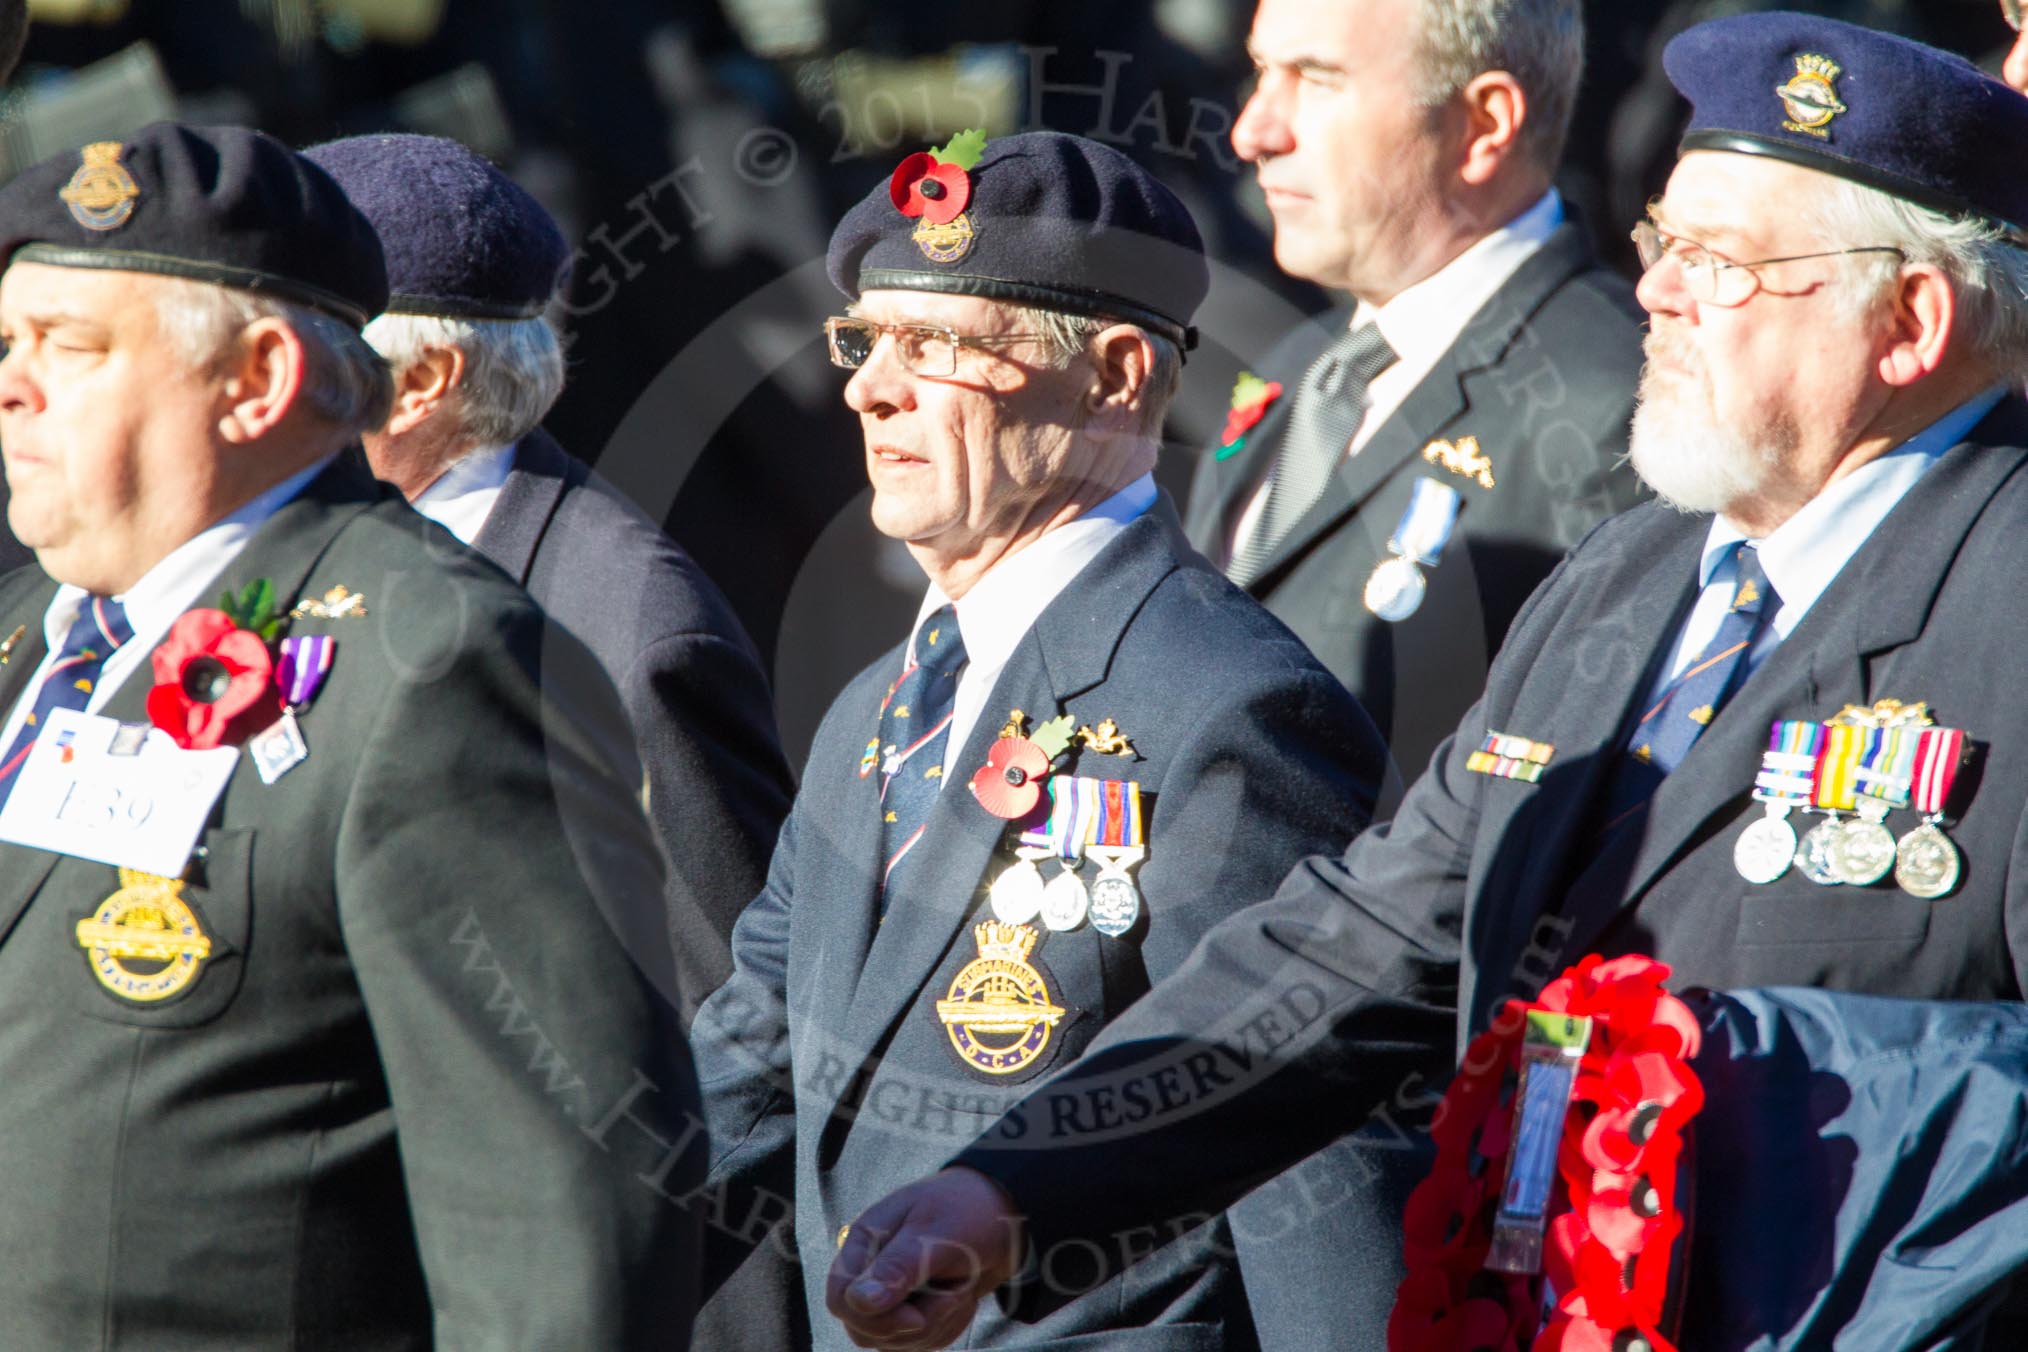 Remembrance Sunday Cenotaph March Past 2013: E39 - Submariners Association..
Press stand opposite the Foreign Office building, Whitehall, London SW1,
London,
Greater London,
United Kingdom,
on 10 November 2013 at 11:49, image #684